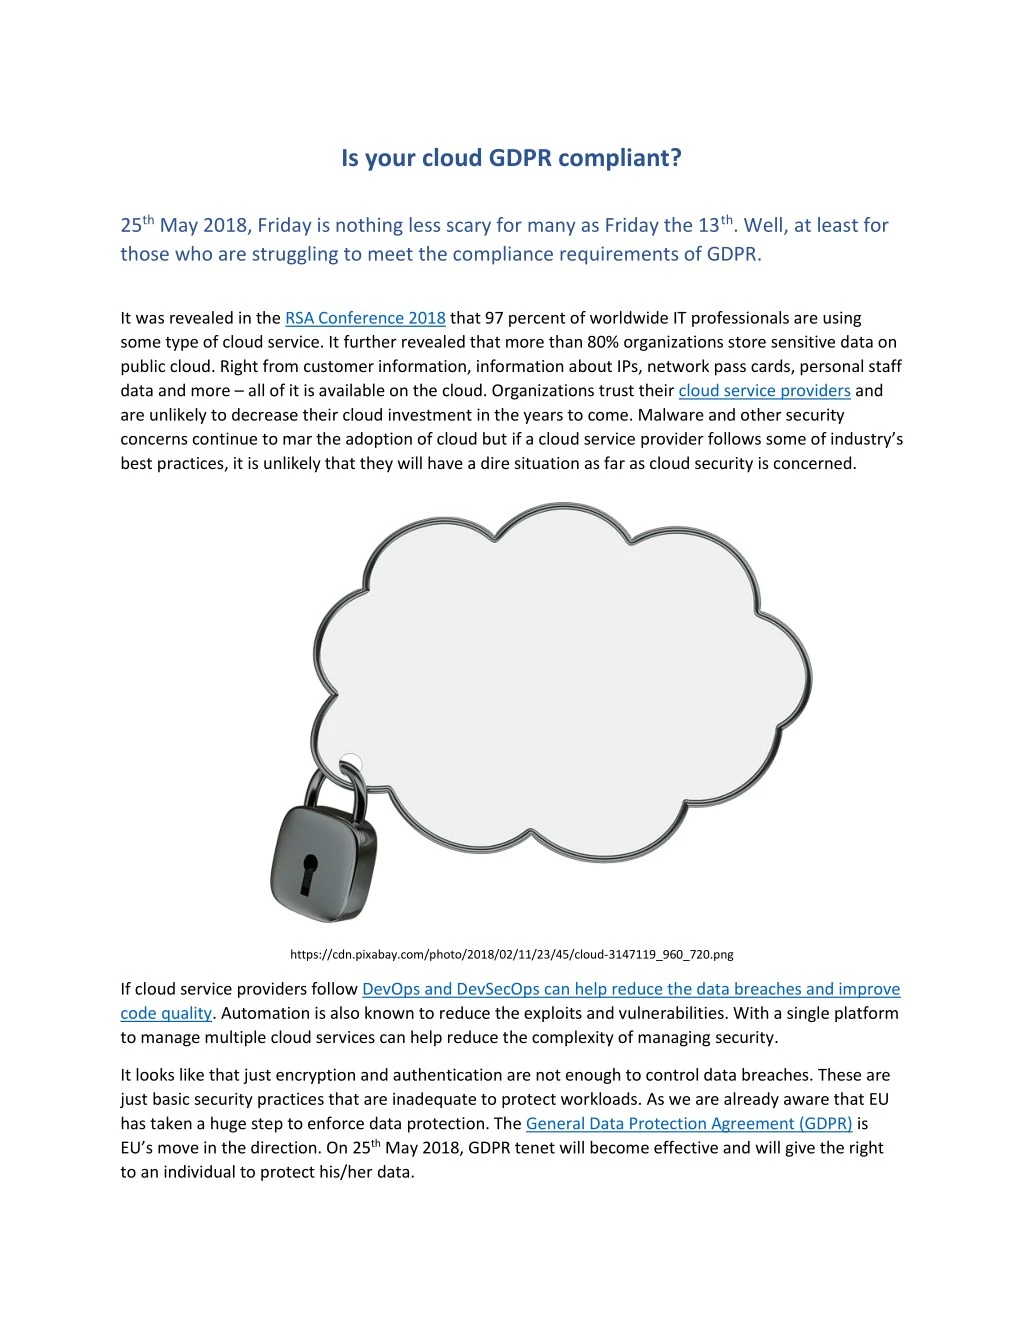 is your cloud gdpr compliant